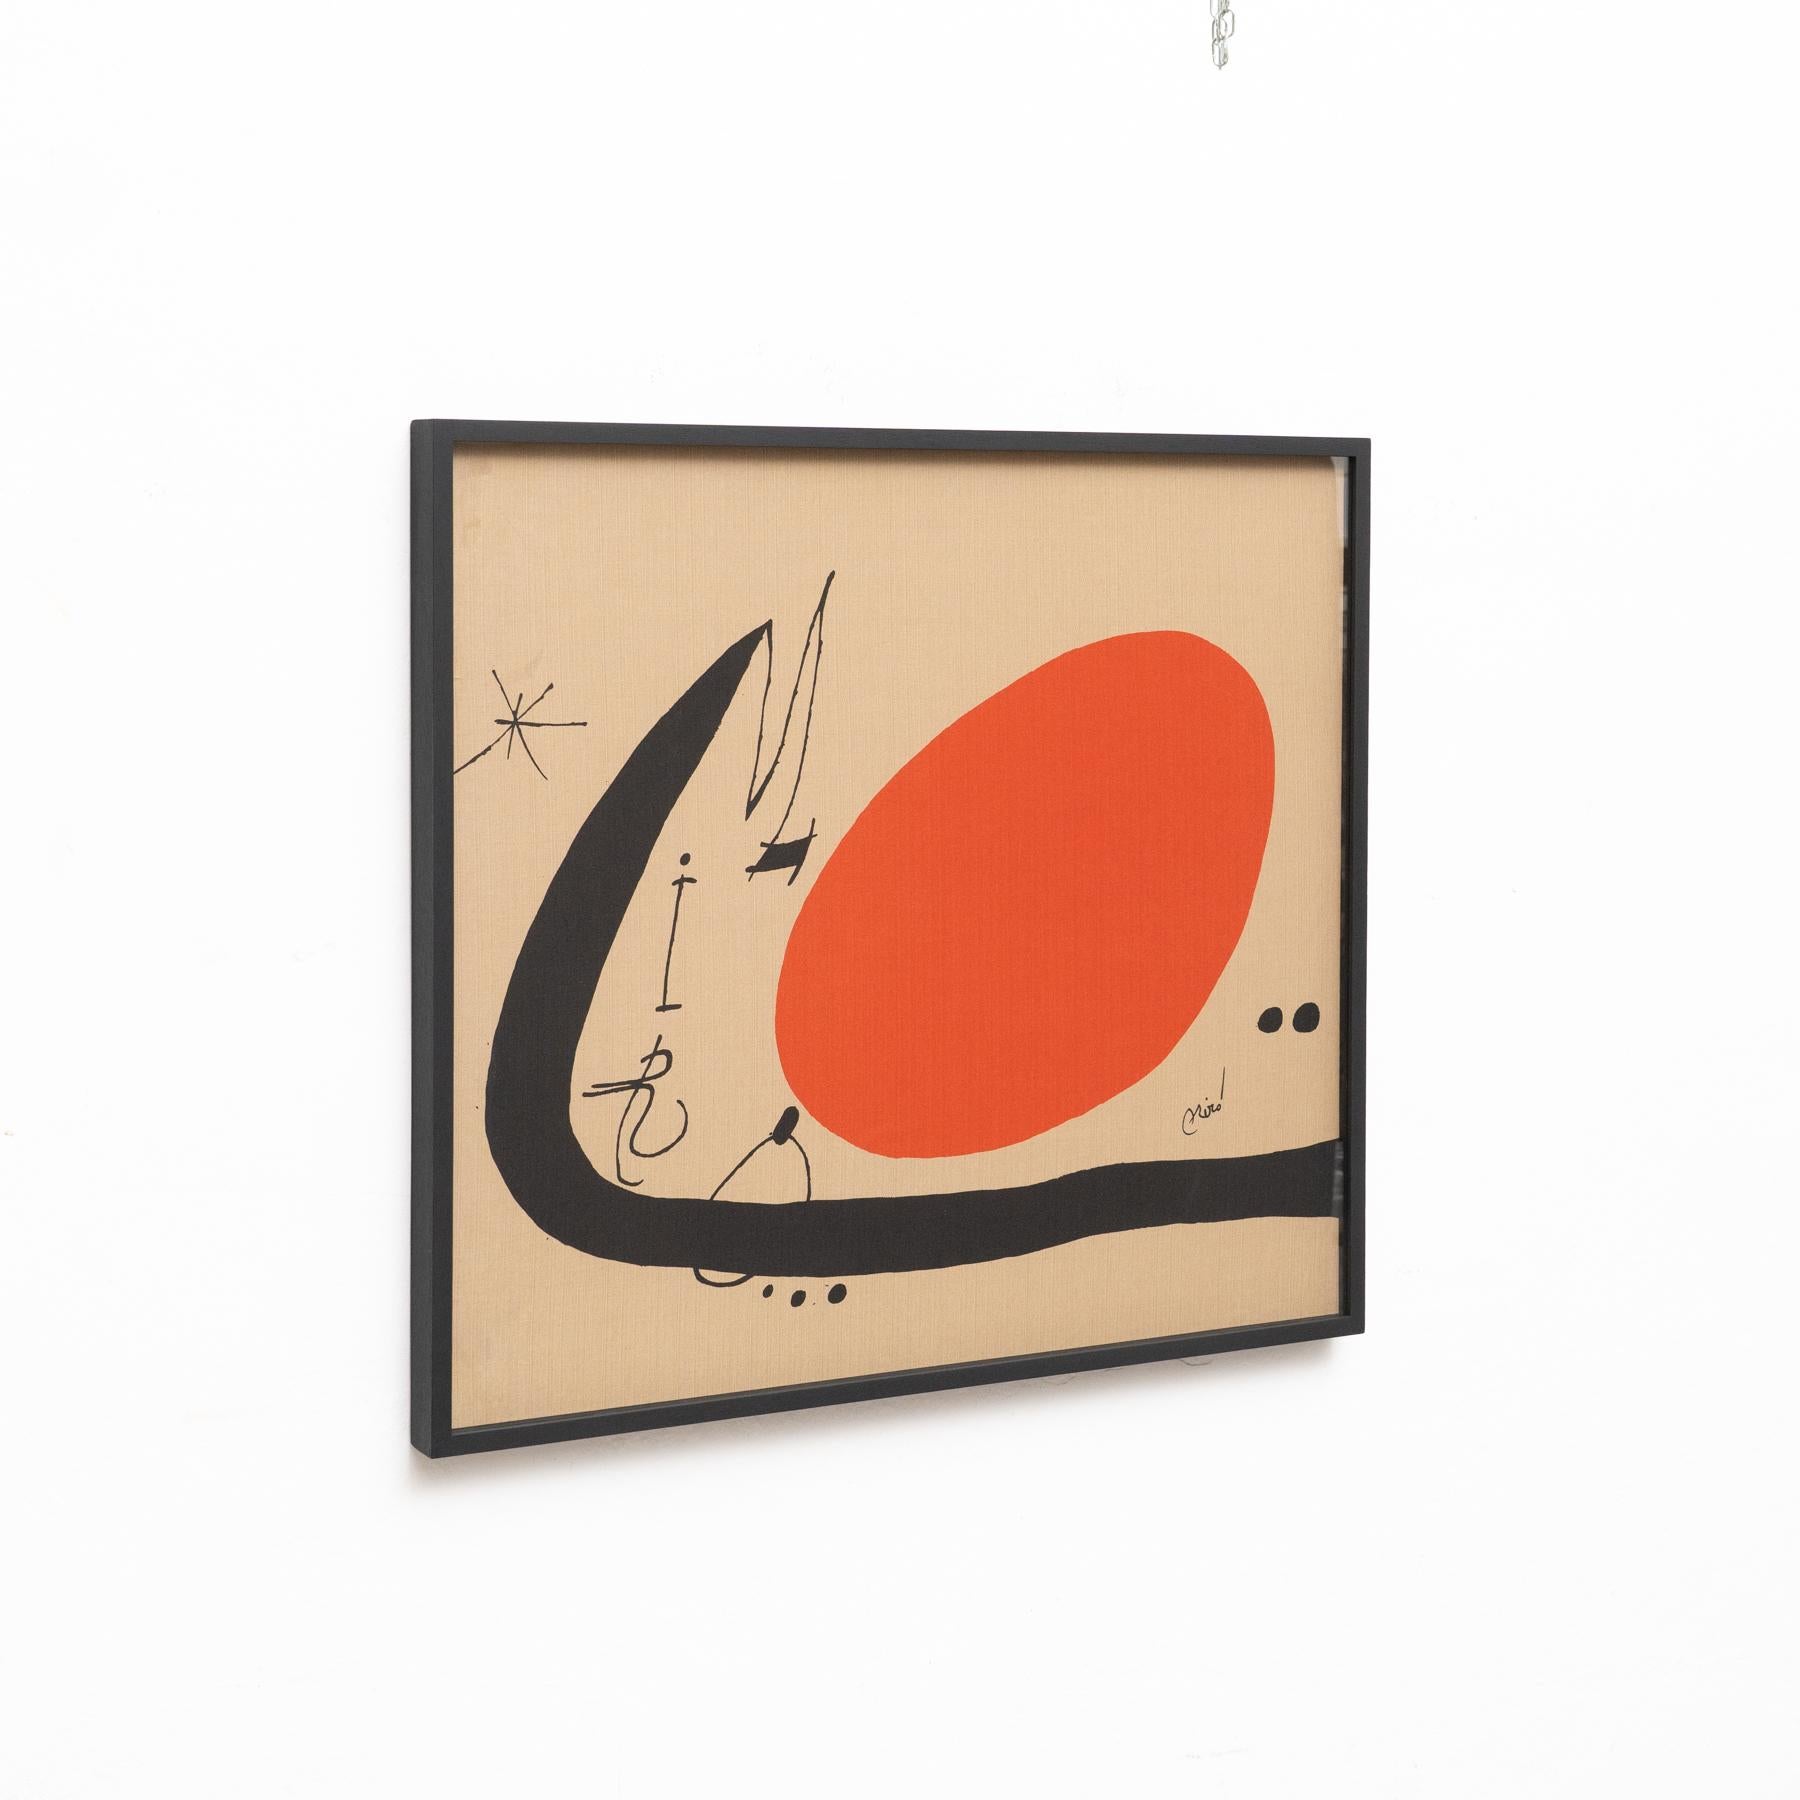 Joan Miro Framed Lithograph in Textile Fabric, circa 1970 For Sale 7